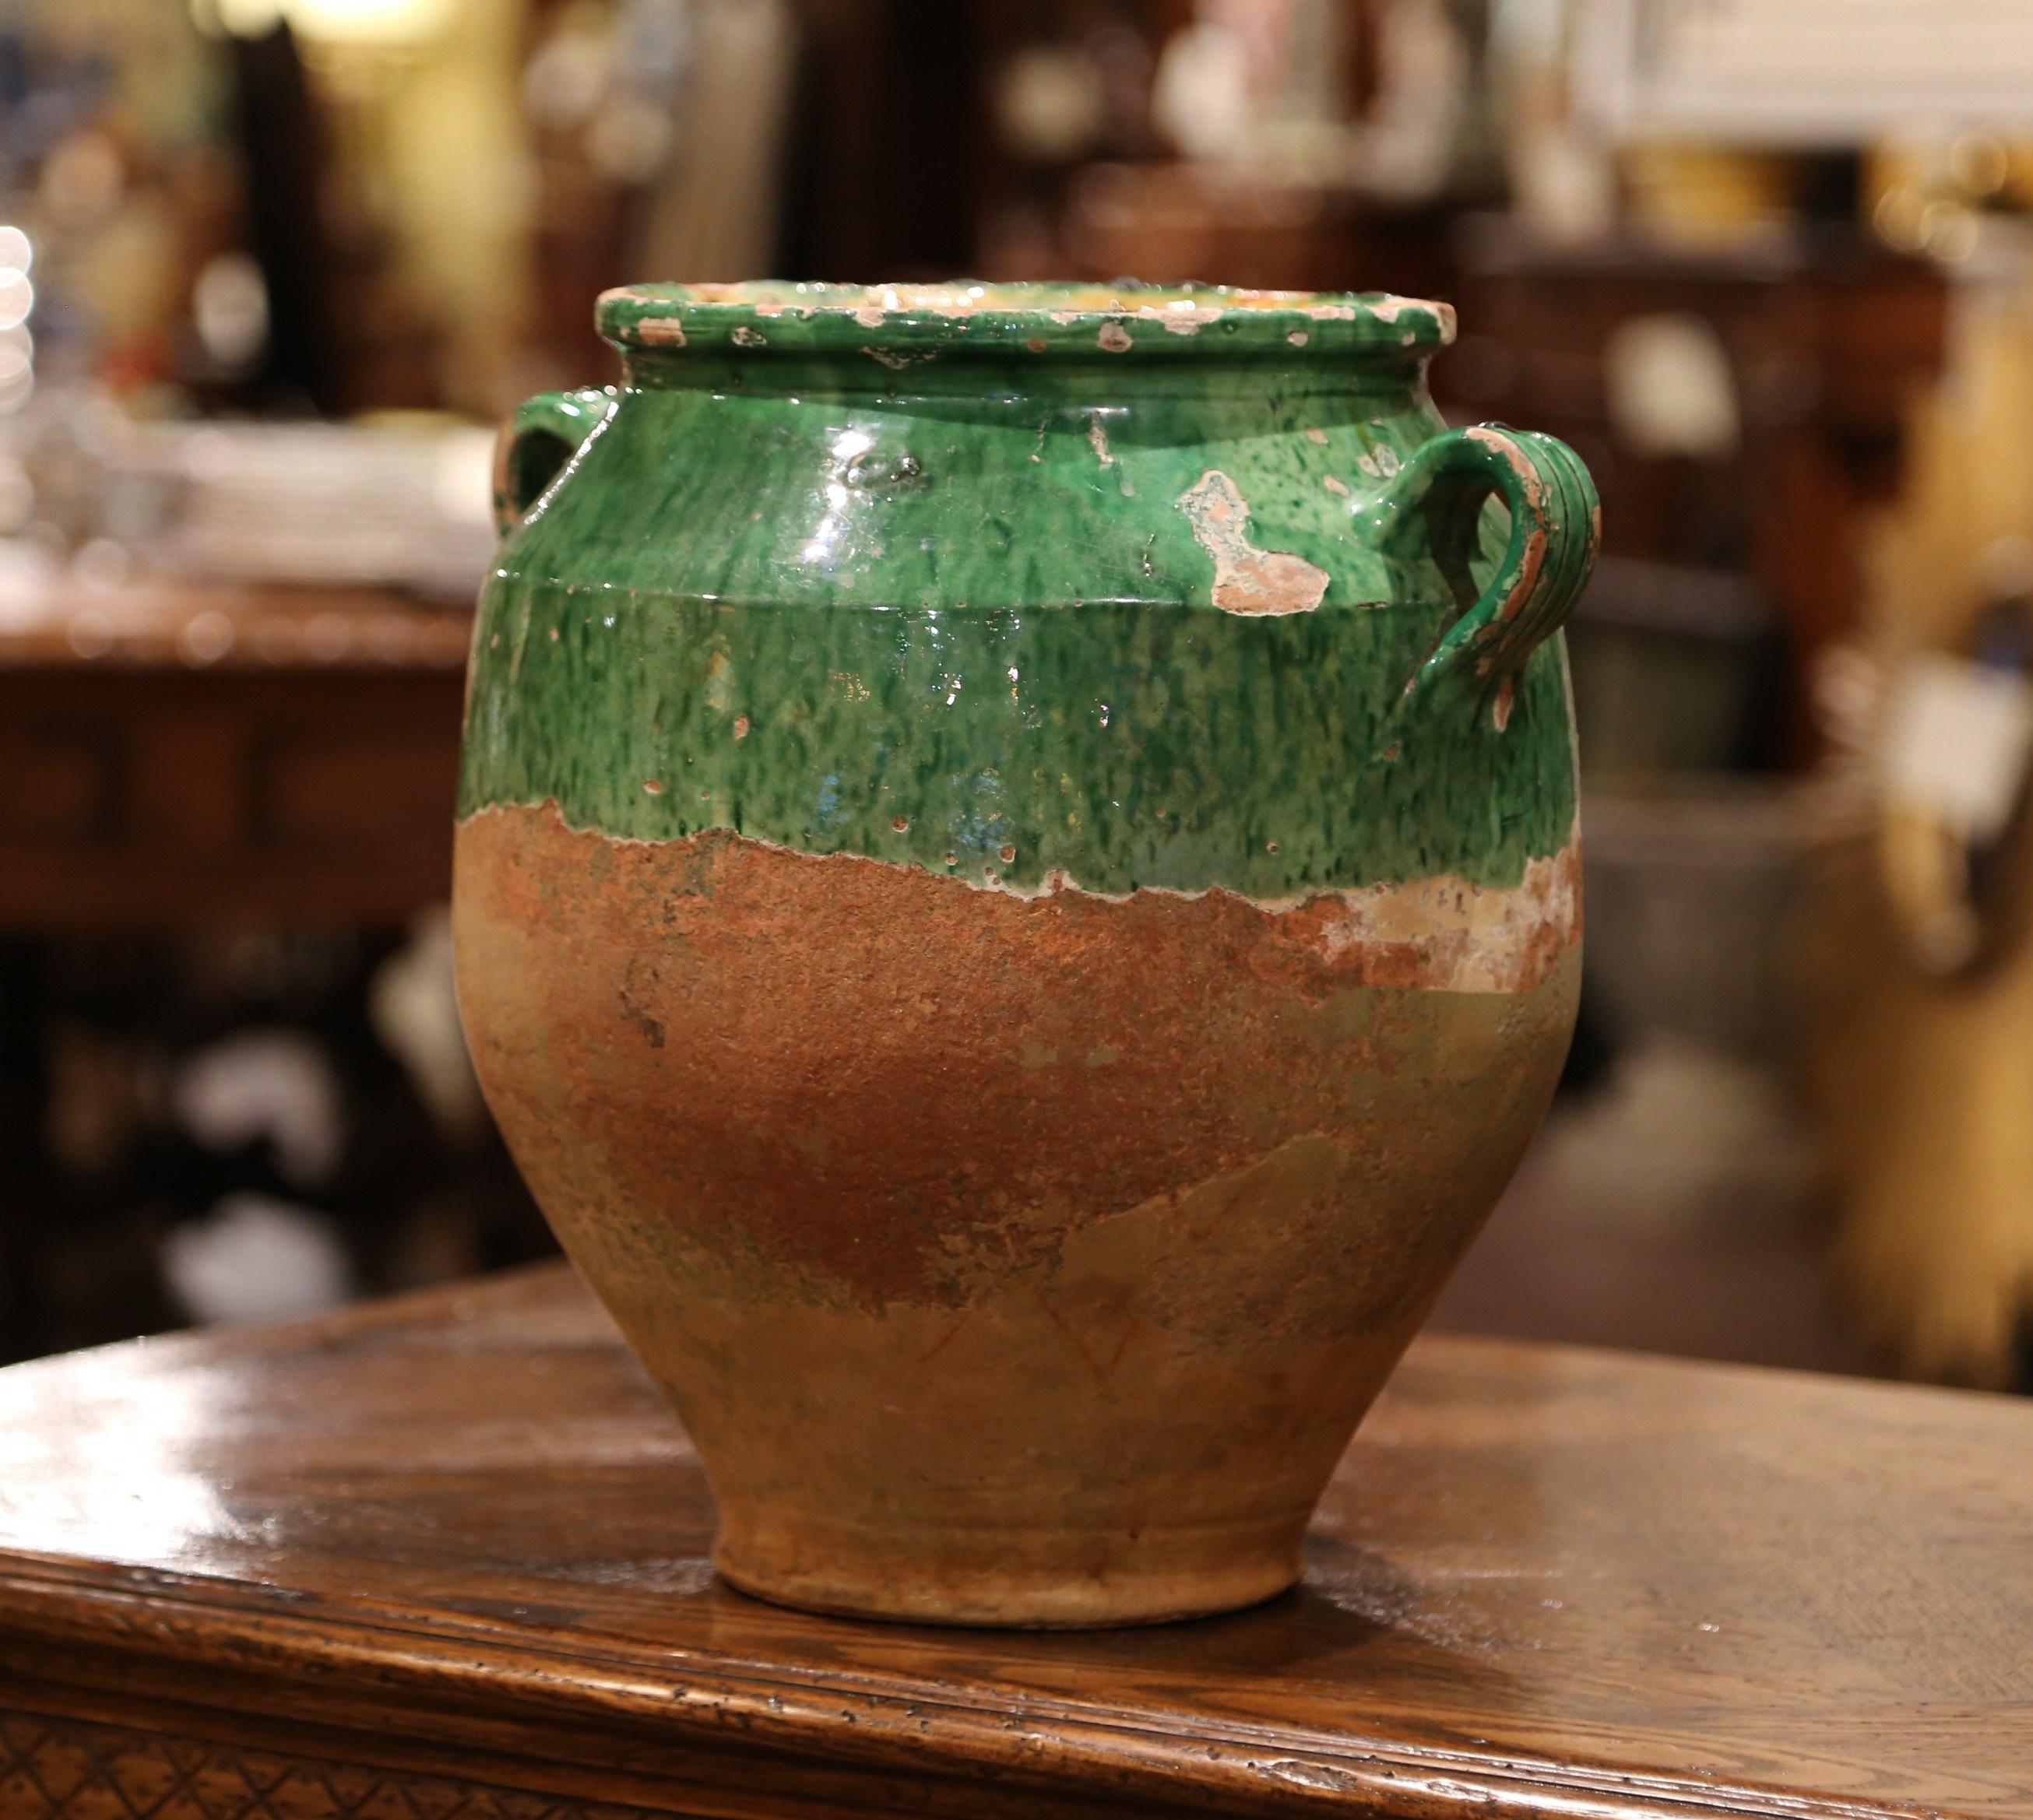 Hard to find with green glazing, this large colorful French confit pot with a glaze upper portion was created in the Perigord region of France, circa 1870. Made of earthenware, these traditional vessels were once used daily in the French country